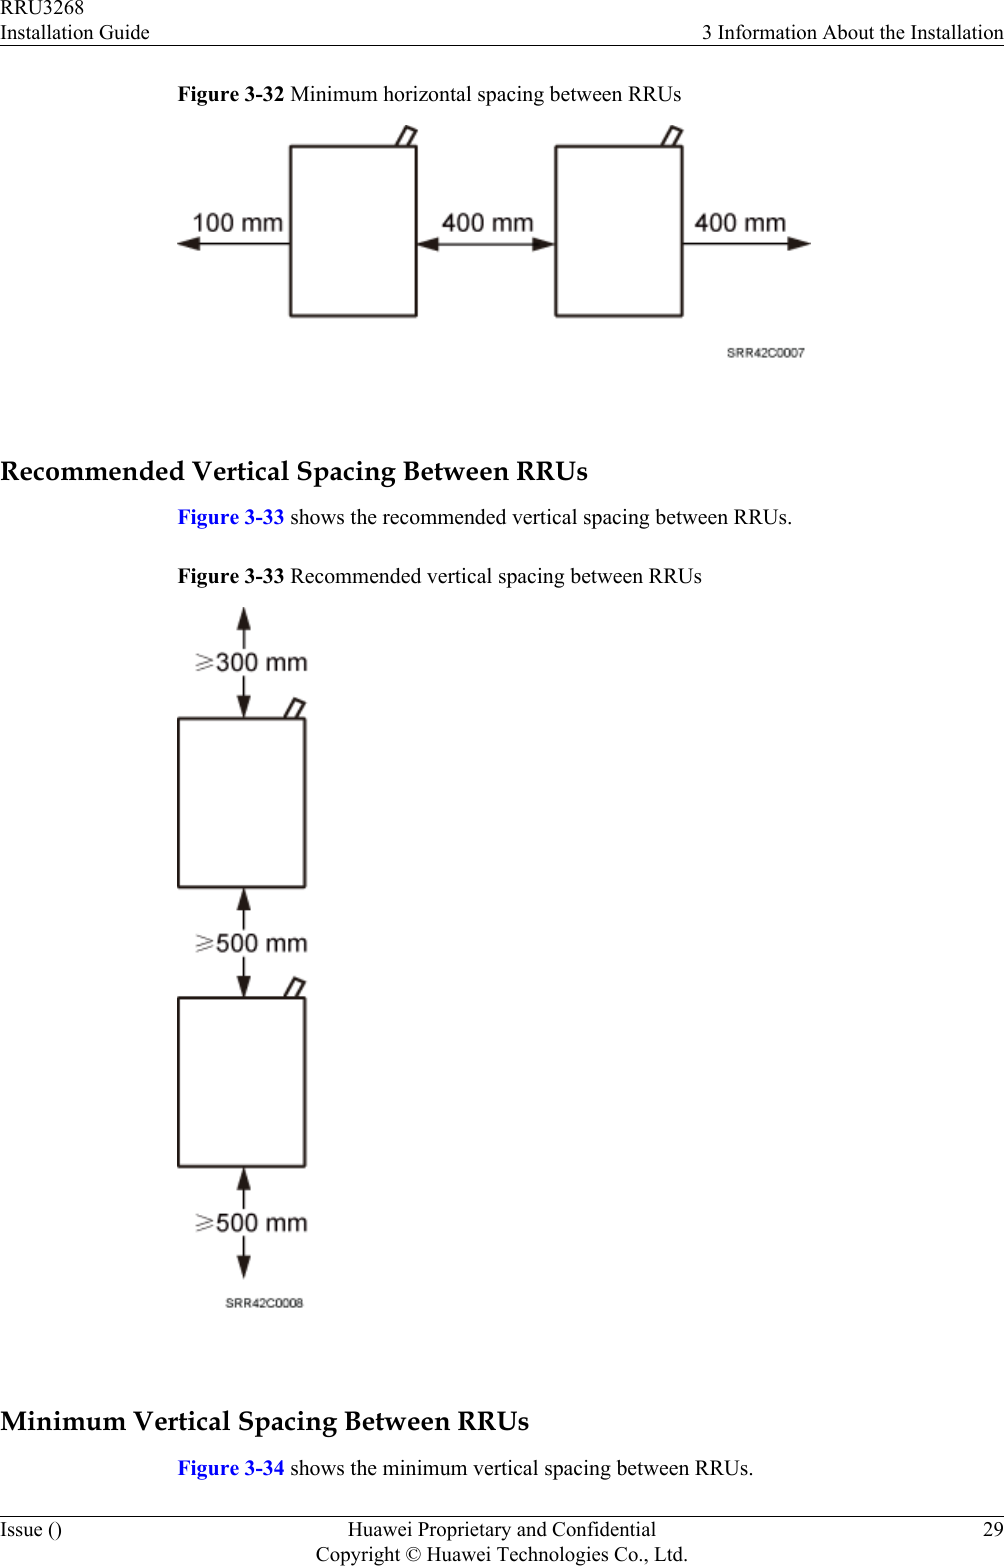 Figure 3-32 Minimum horizontal spacing between RRUs Recommended Vertical Spacing Between RRUsFigure 3-33 shows the recommended vertical spacing between RRUs.Figure 3-33 Recommended vertical spacing between RRUs Minimum Vertical Spacing Between RRUsFigure 3-34 shows the minimum vertical spacing between RRUs.RRU3268Installation Guide 3 Information About the InstallationIssue () Huawei Proprietary and ConfidentialCopyright © Huawei Technologies Co., Ltd.29